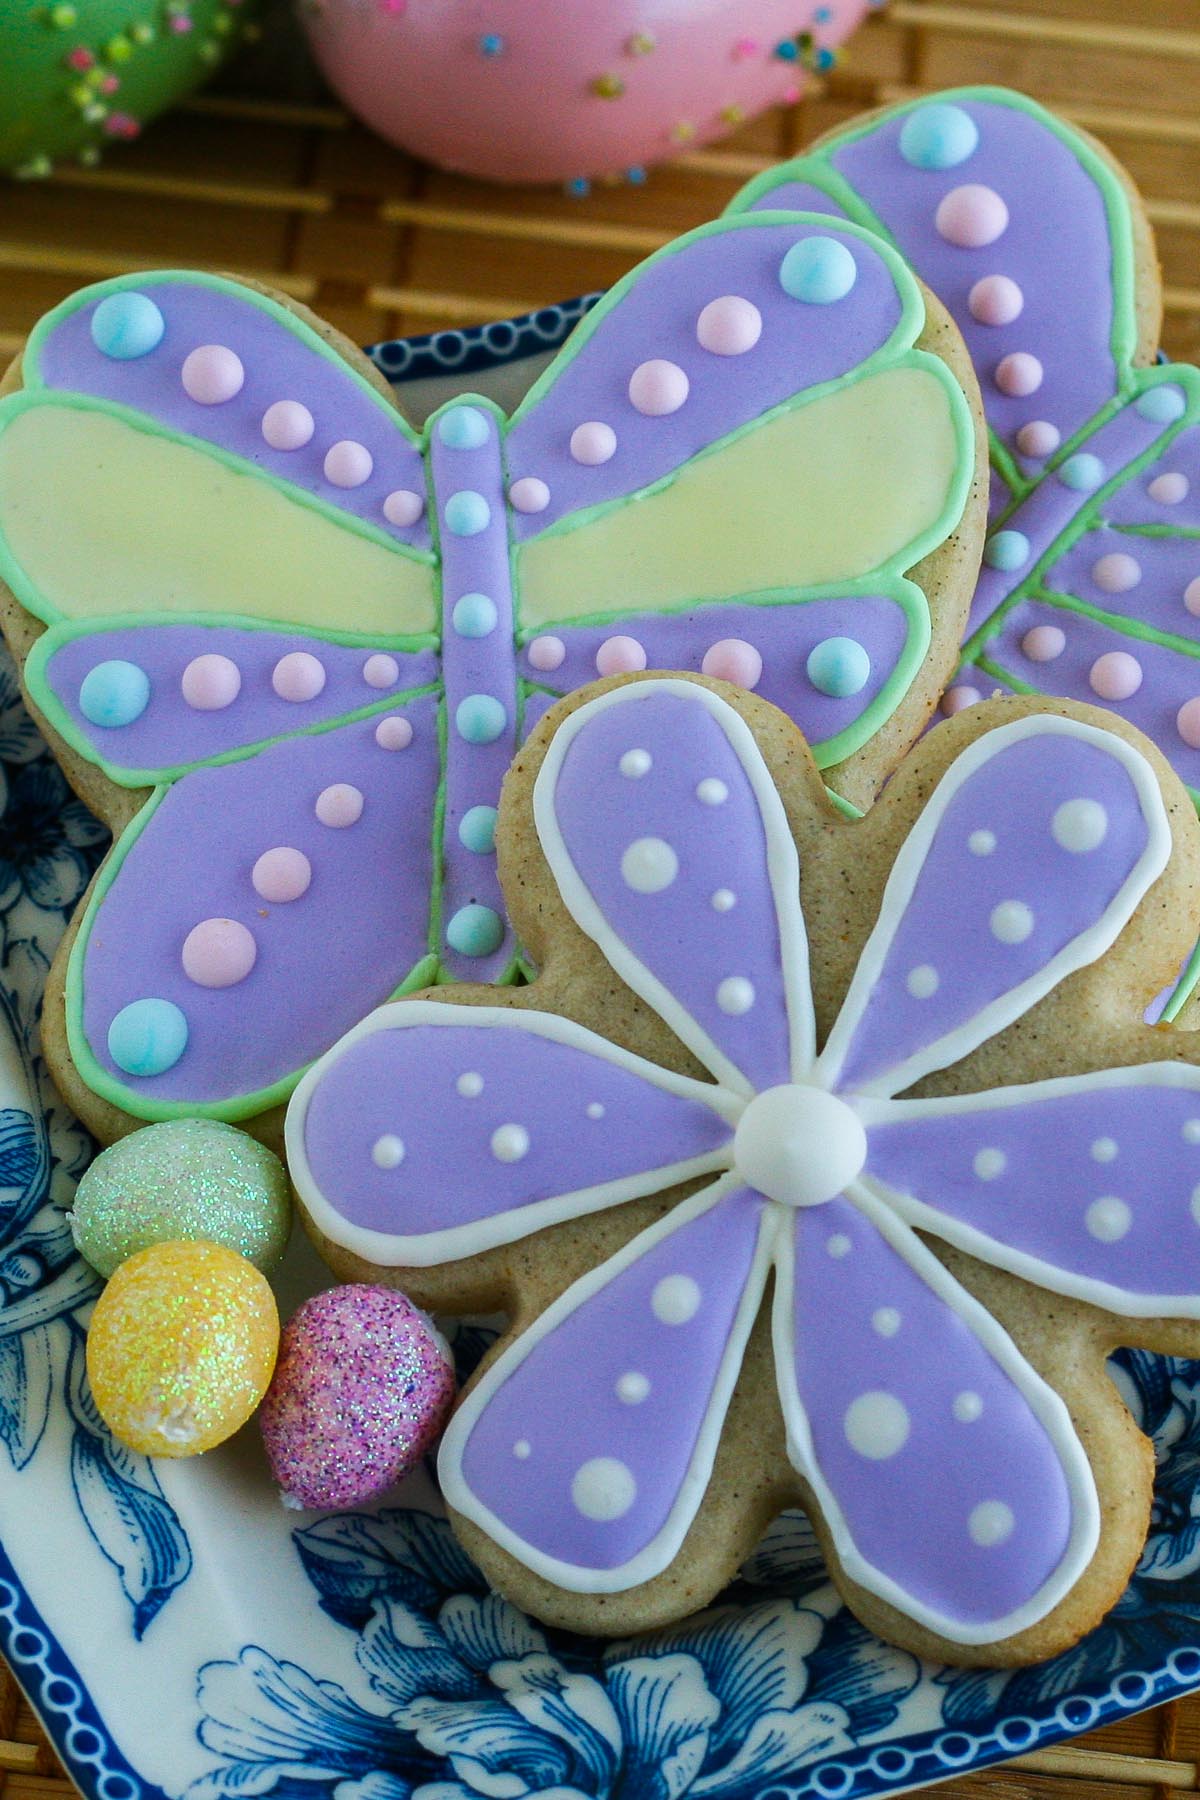 Flower and butterfly shaped sugar cookies decorated with colourful royal icing.